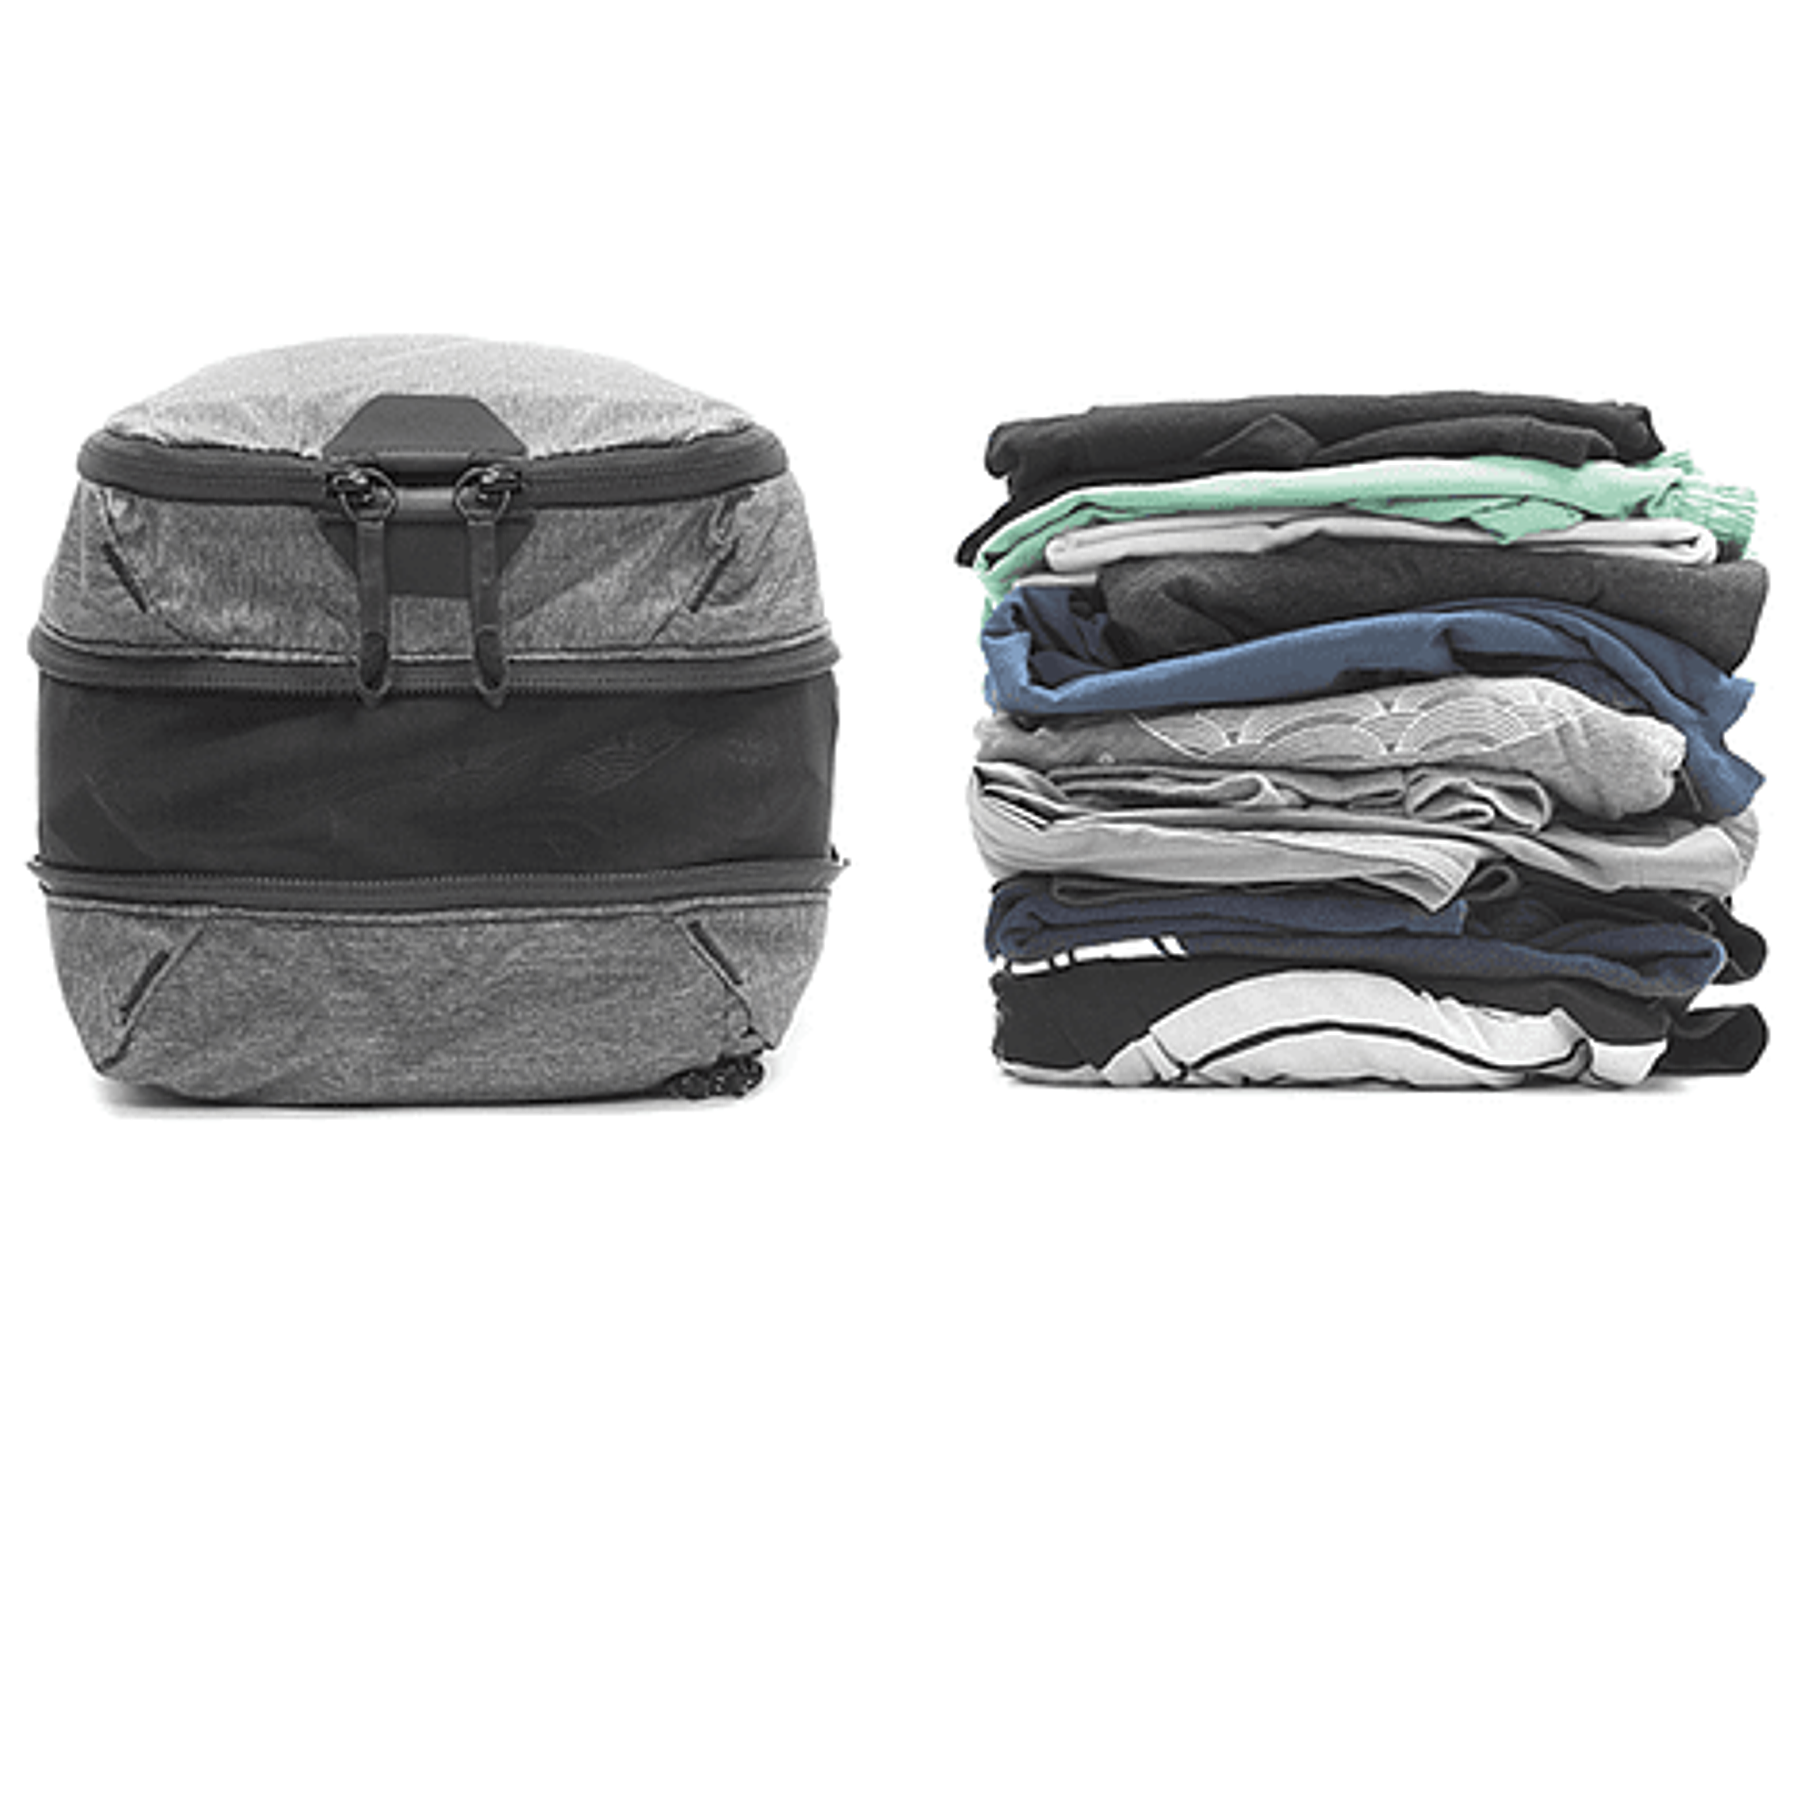 Bolso Peak Design Packing Cube para Travel Backpack Small